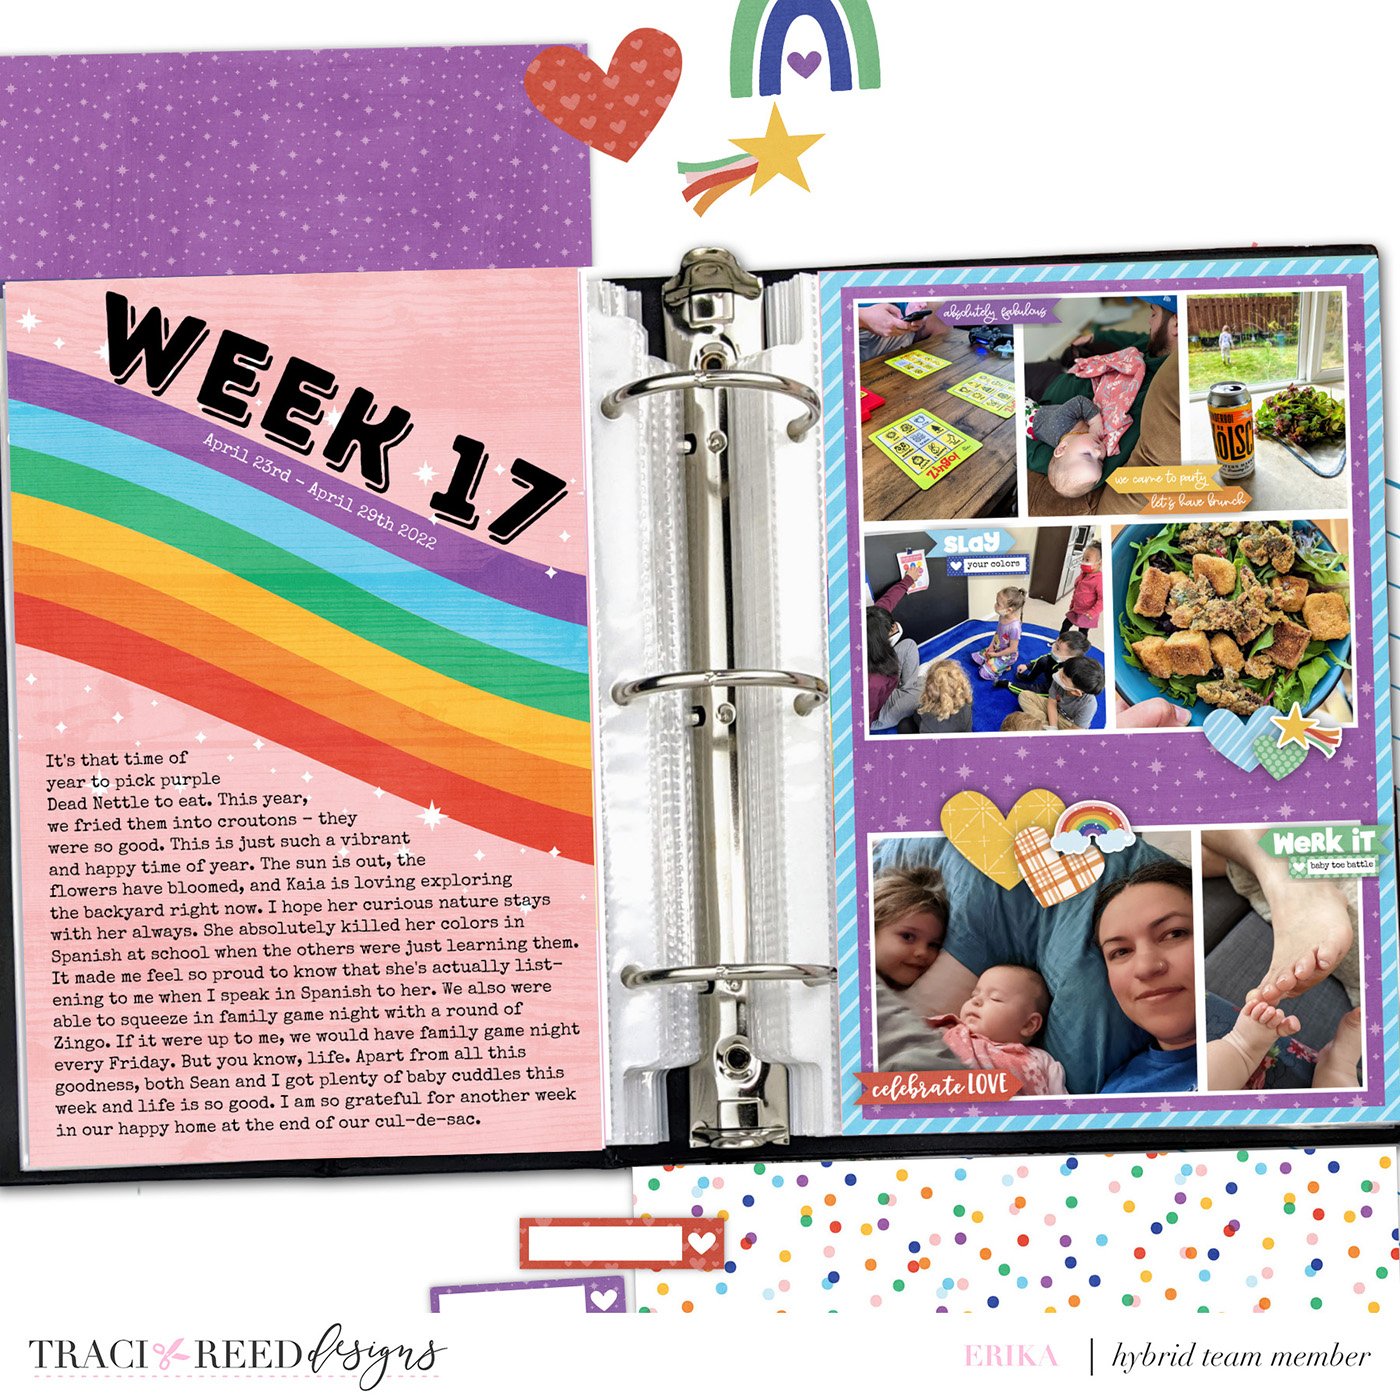 Get Your Hands on a Solid Scrapbooking Theme